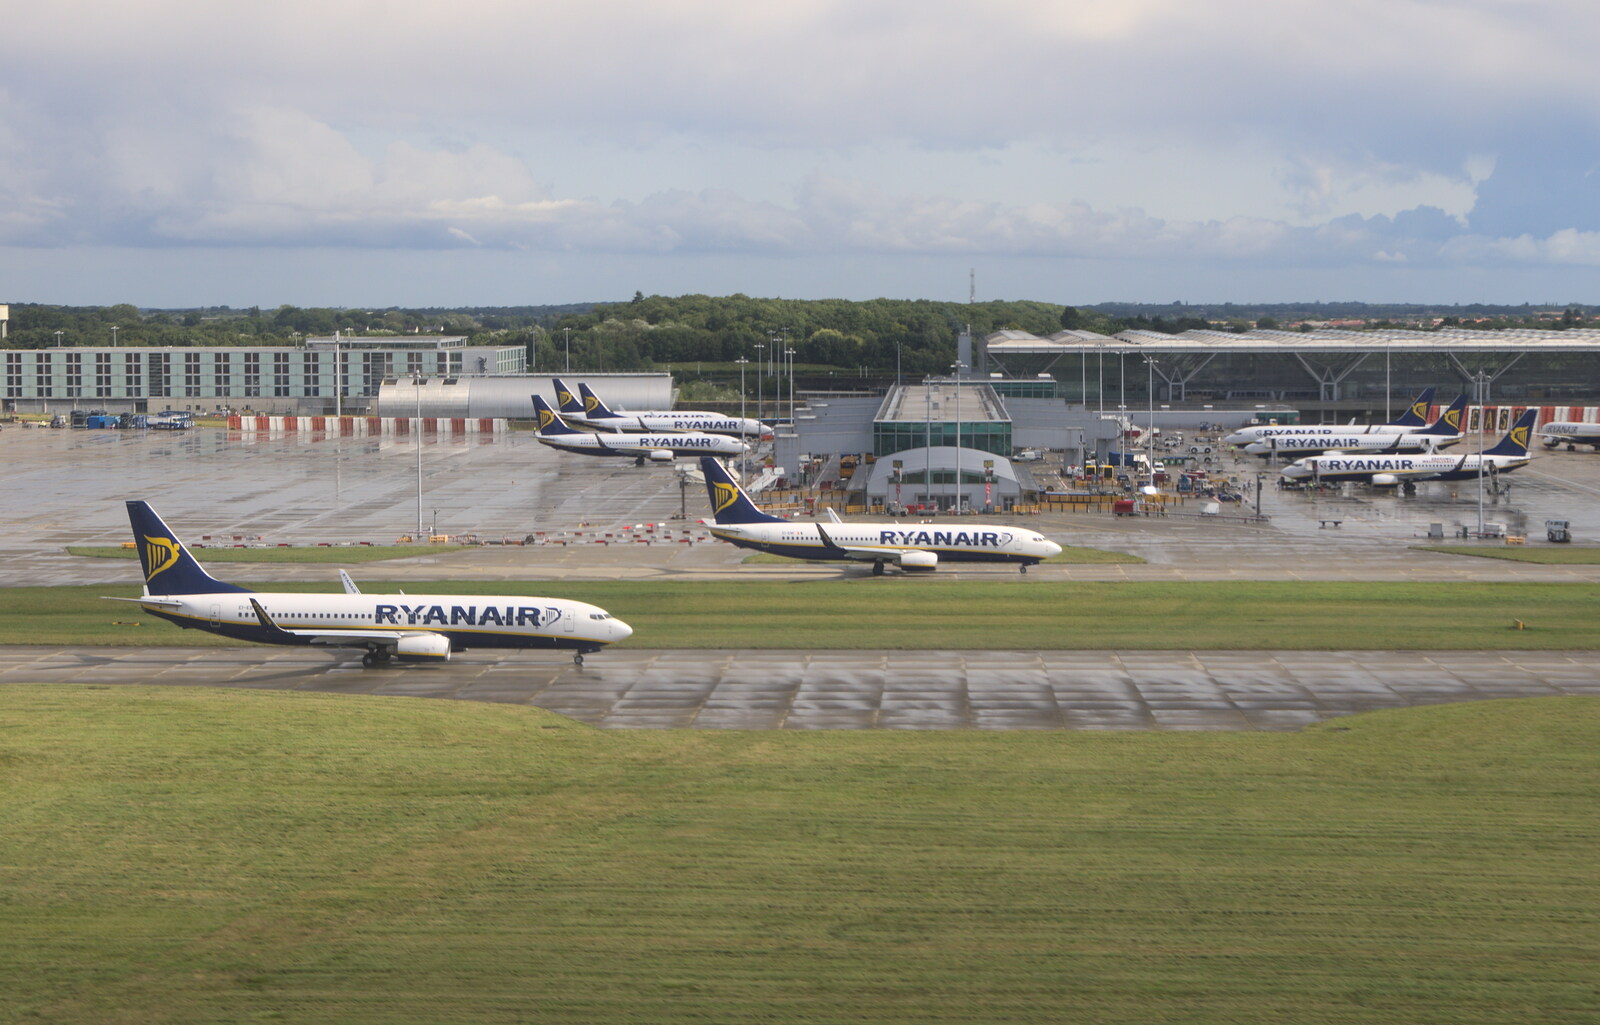 Another view of Stansted airport as the plane lands from A Night Out in Dublin, County Dublin, Ireland - 9th August 2014